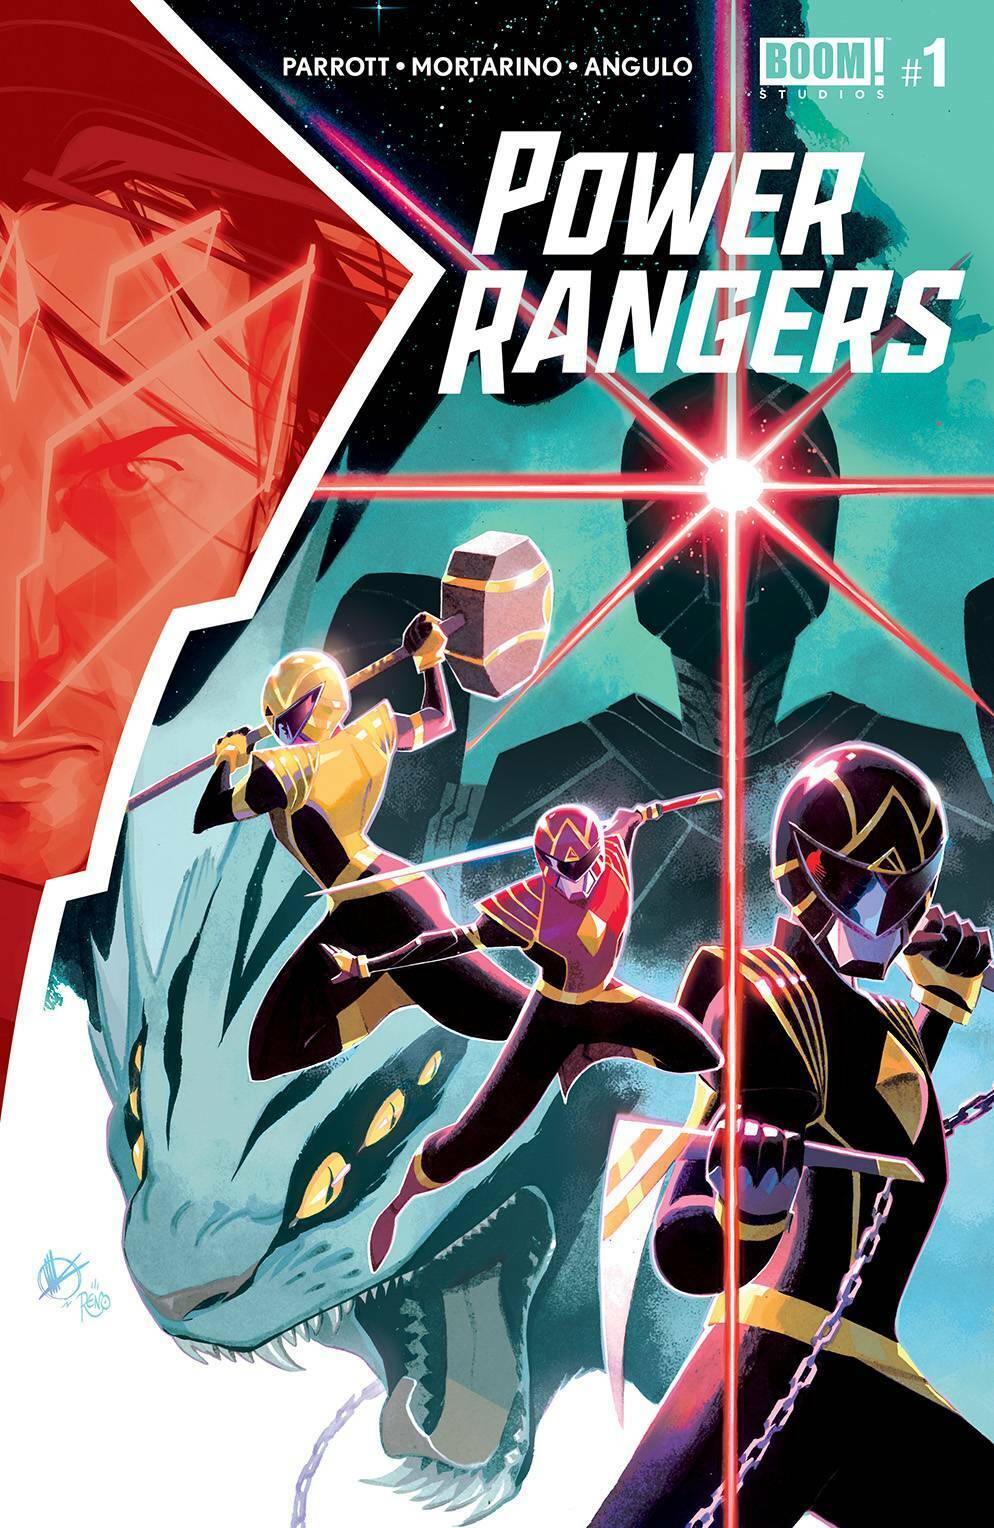 Power Rangers #1-22 Main Cover/Variants/New Printings SOLD SEPARATELY Unlimited